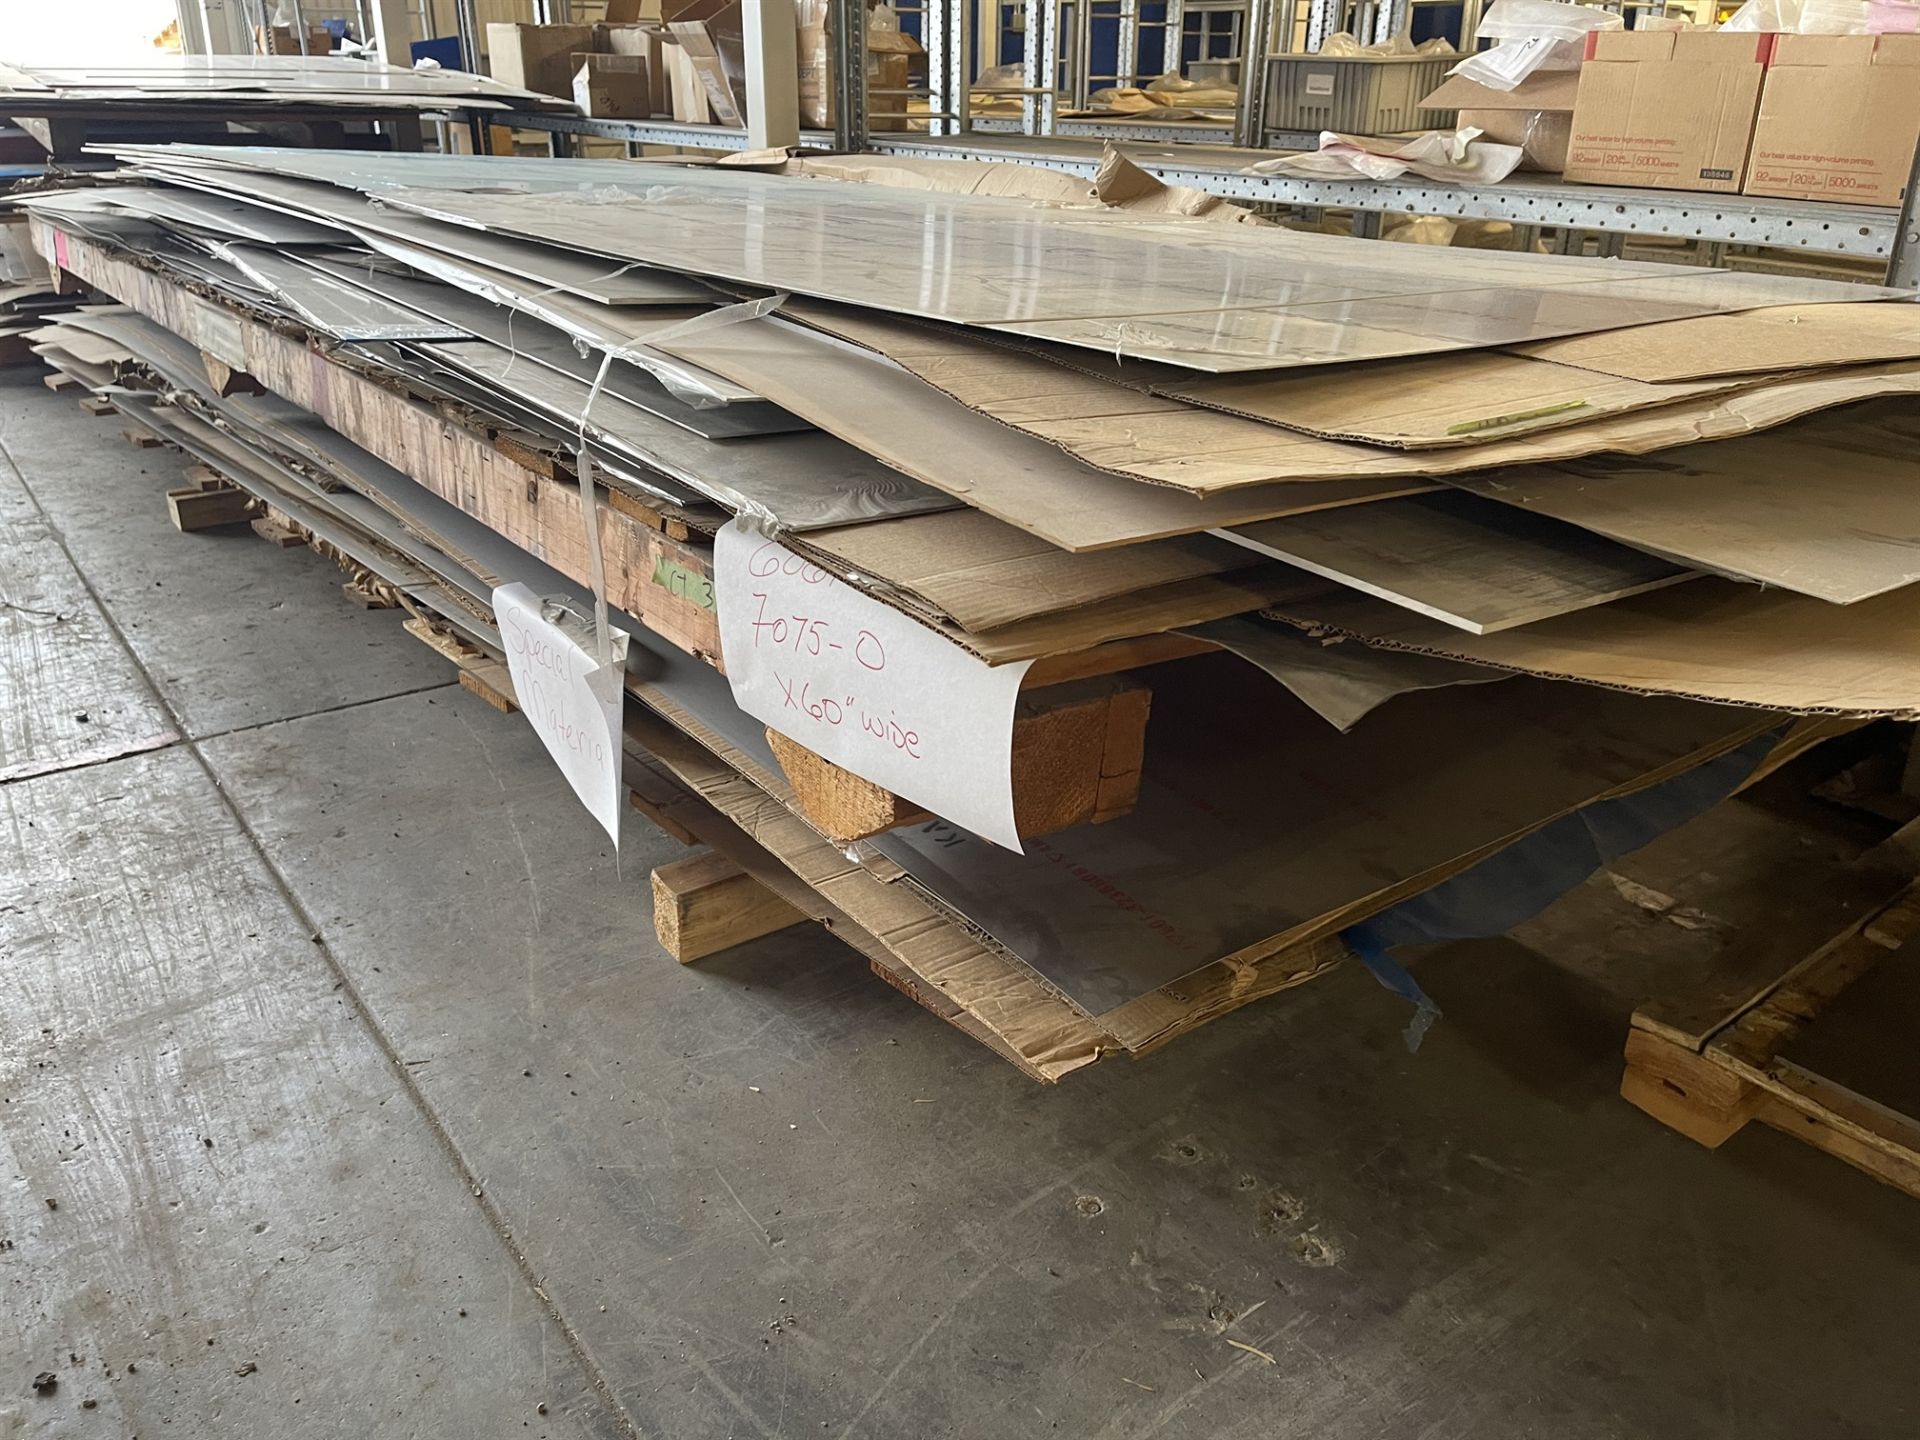 Lot Comprising Stack of Assorted Specialty Aluminum Sheet Stock, Including 2024-T81, 7475-T761, - Image 3 of 5